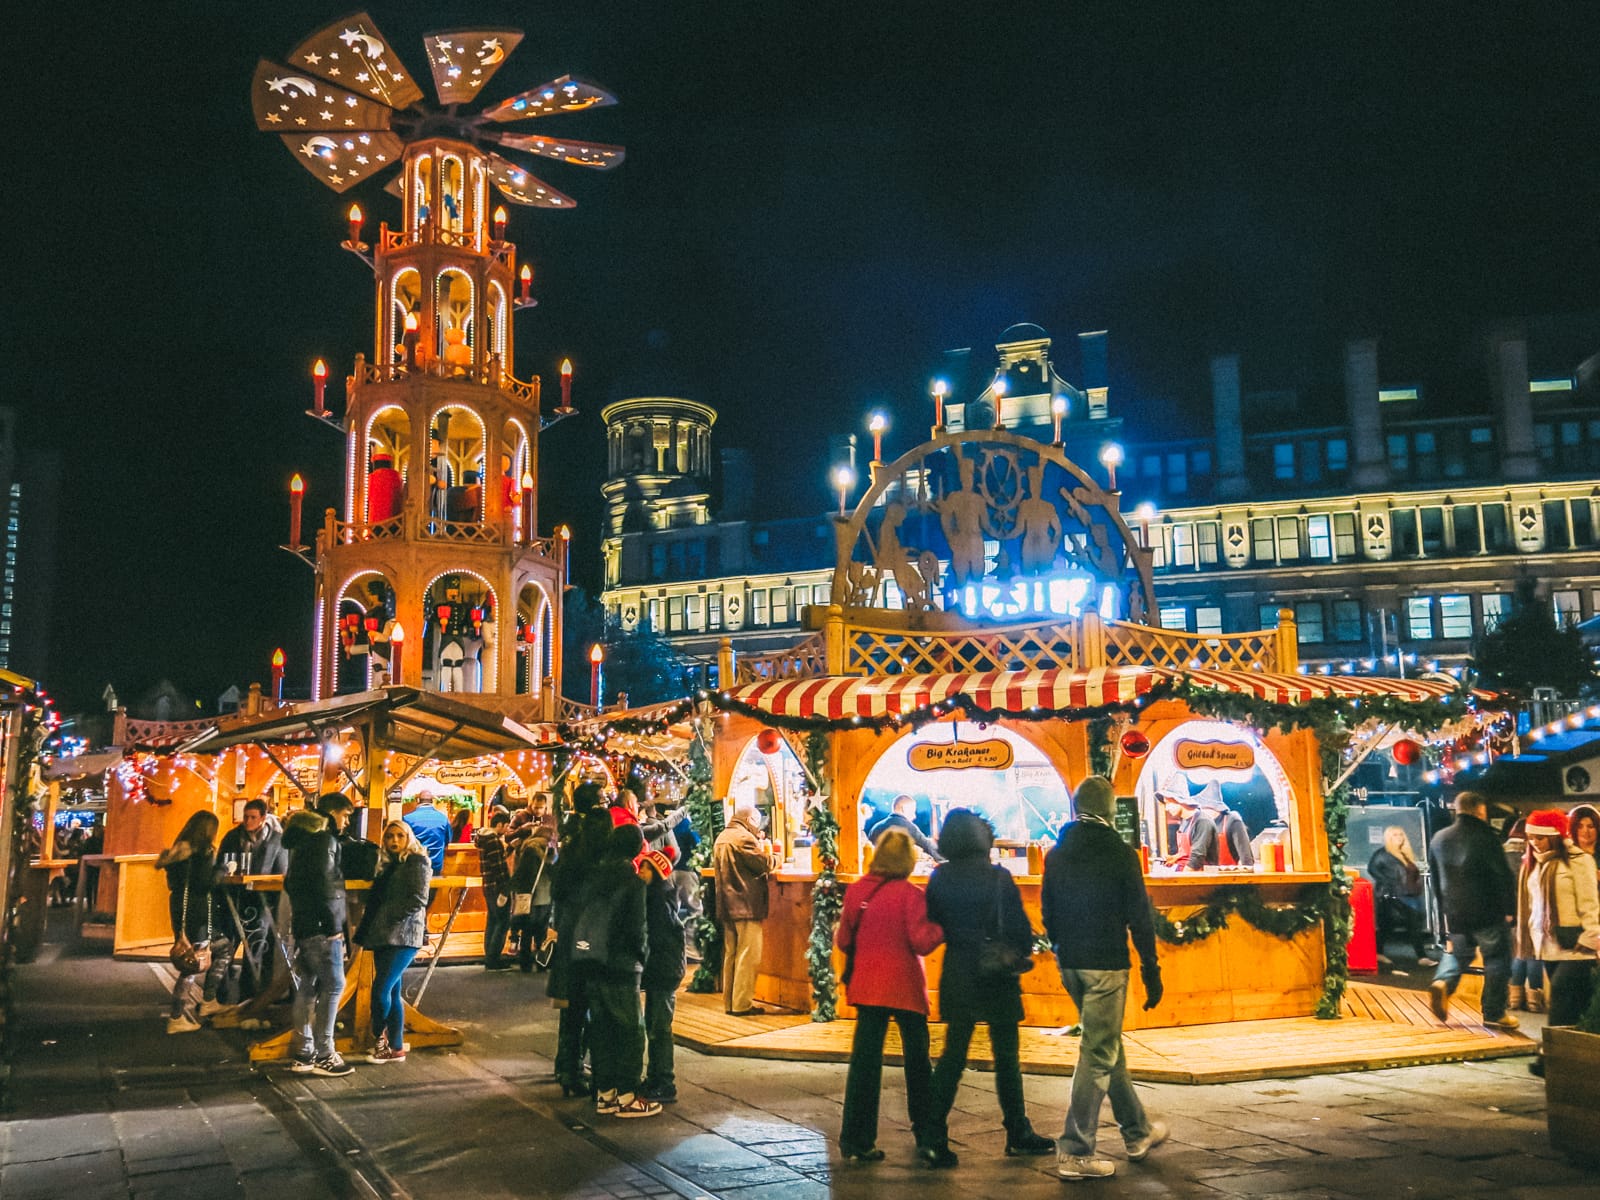 Top 13 Best Uk Christmas Markets For 2021 (With Secret